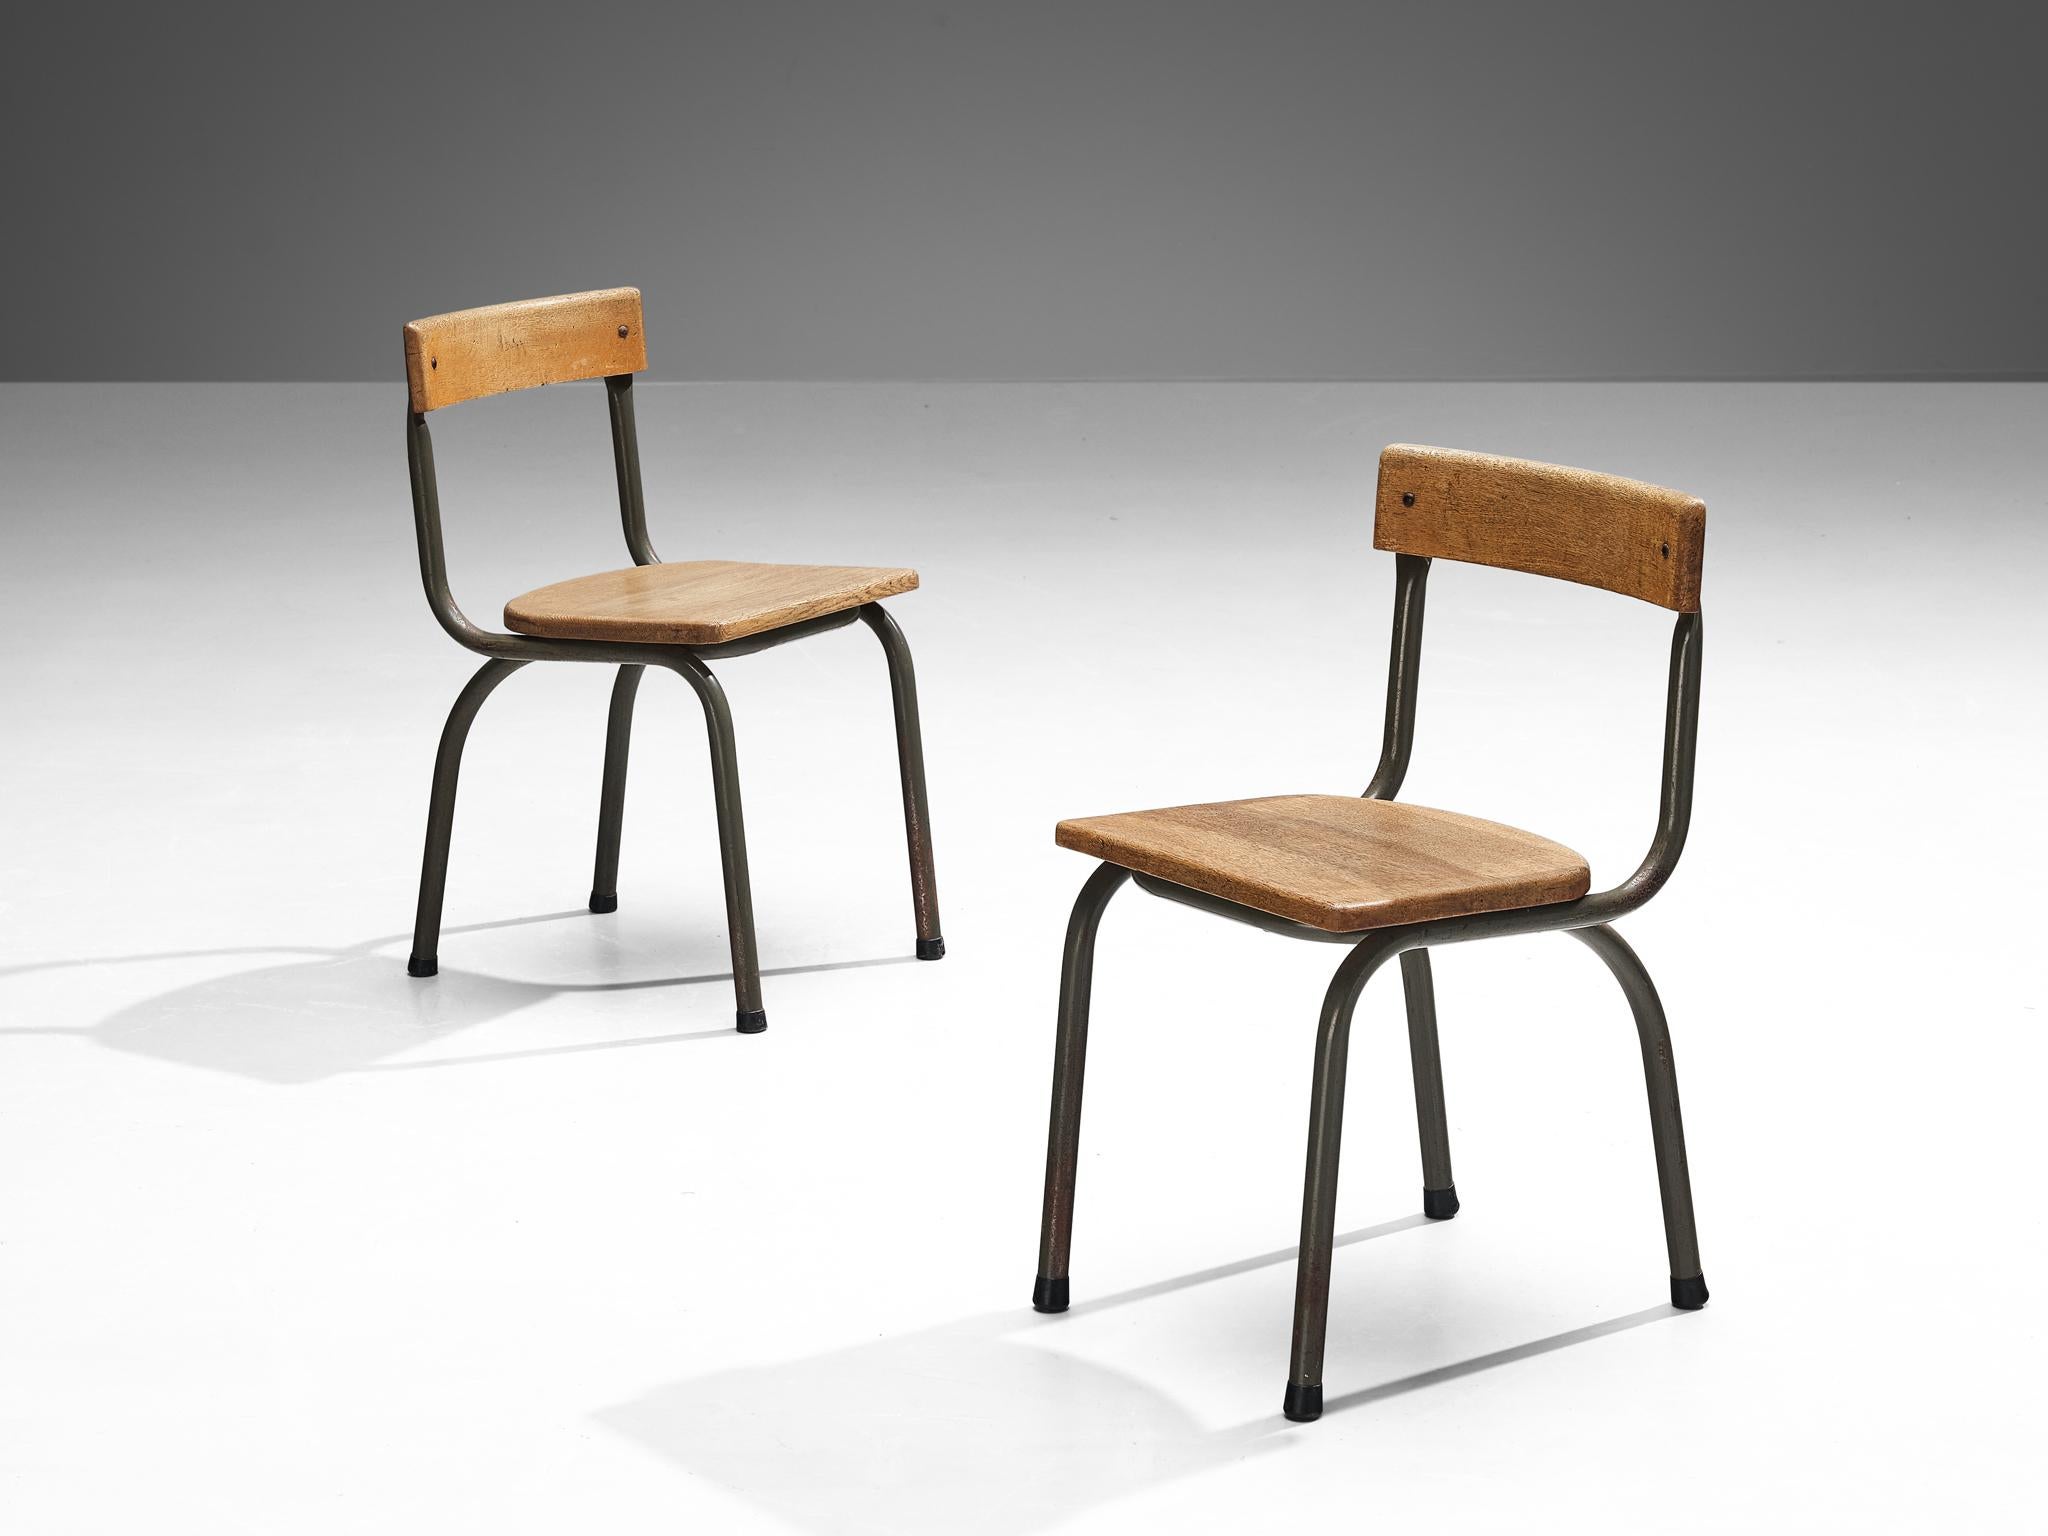 Willy Van Der Meeren for Tubax, chairs, metal, oak, Belgium, 1957.

This pair of industrial chairs is designed by the Belgian designer Willy Van Der Meeren. These sober yet interesting and moody set of chairs features a seat- and backrest in oakwood